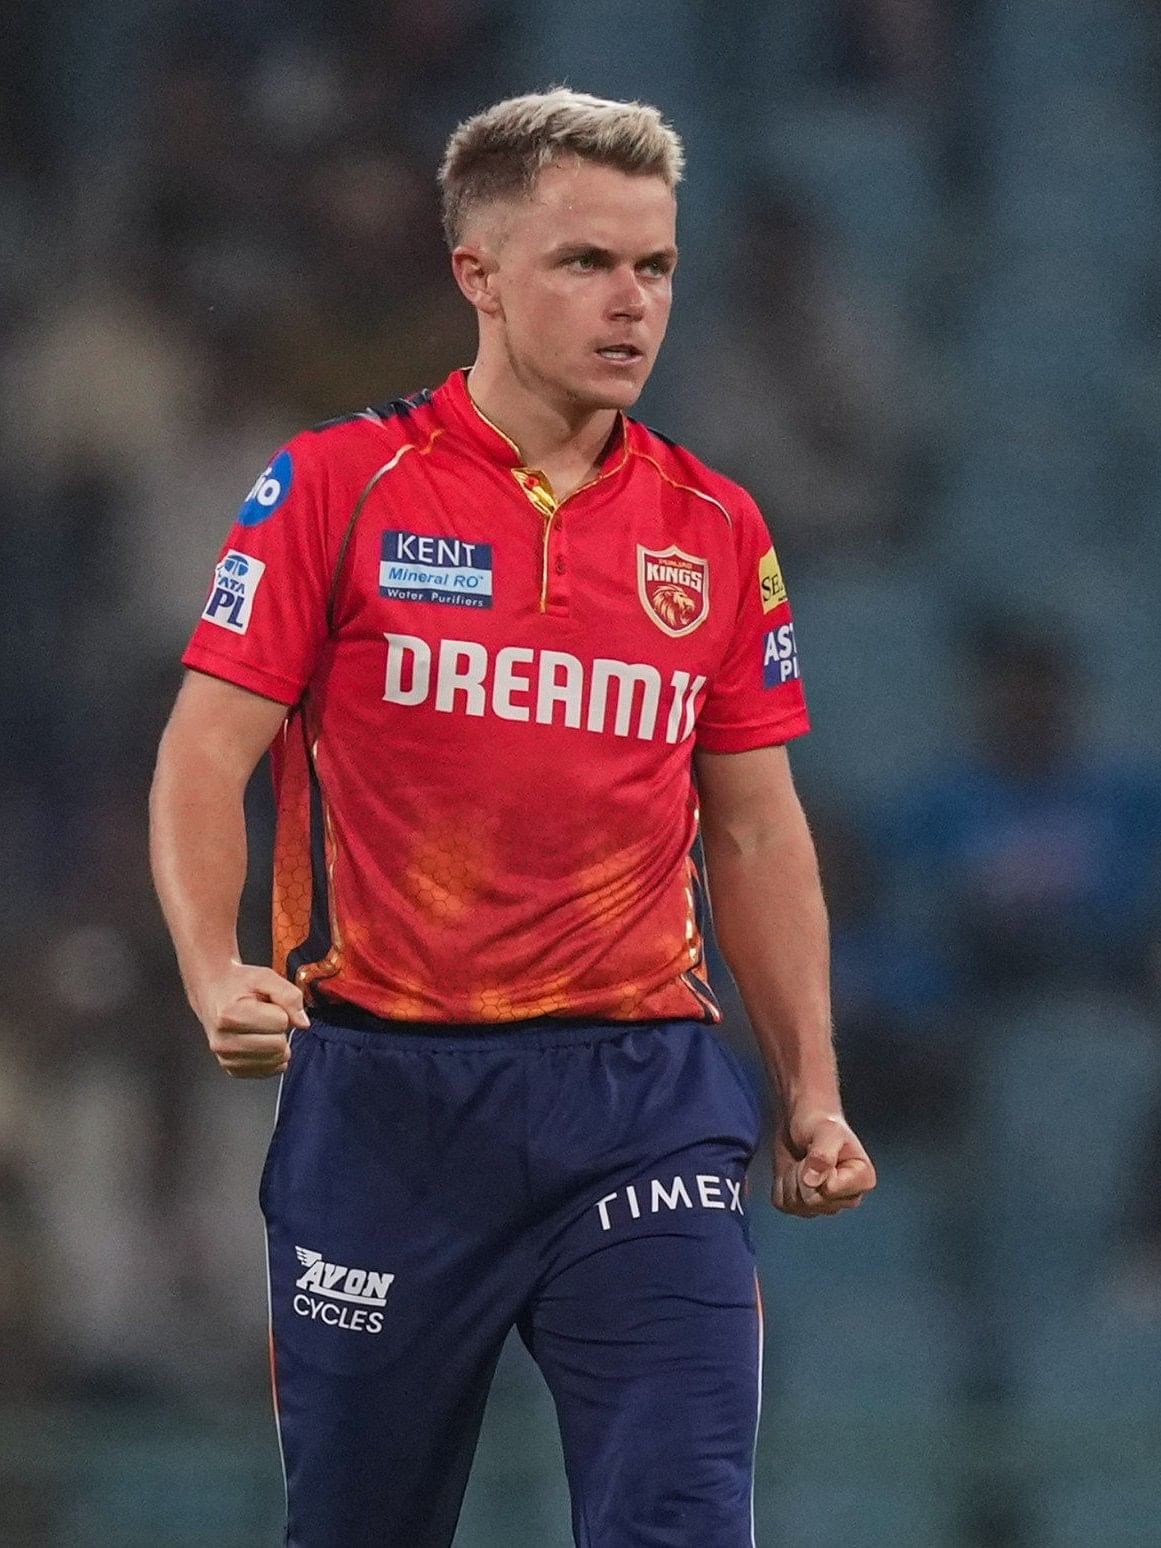 With raw pace and the ability to bowl a tight line, Sam Curran (PKBS)  is a threat to batters in all conditions. He has picked 6 wickets this season so far.